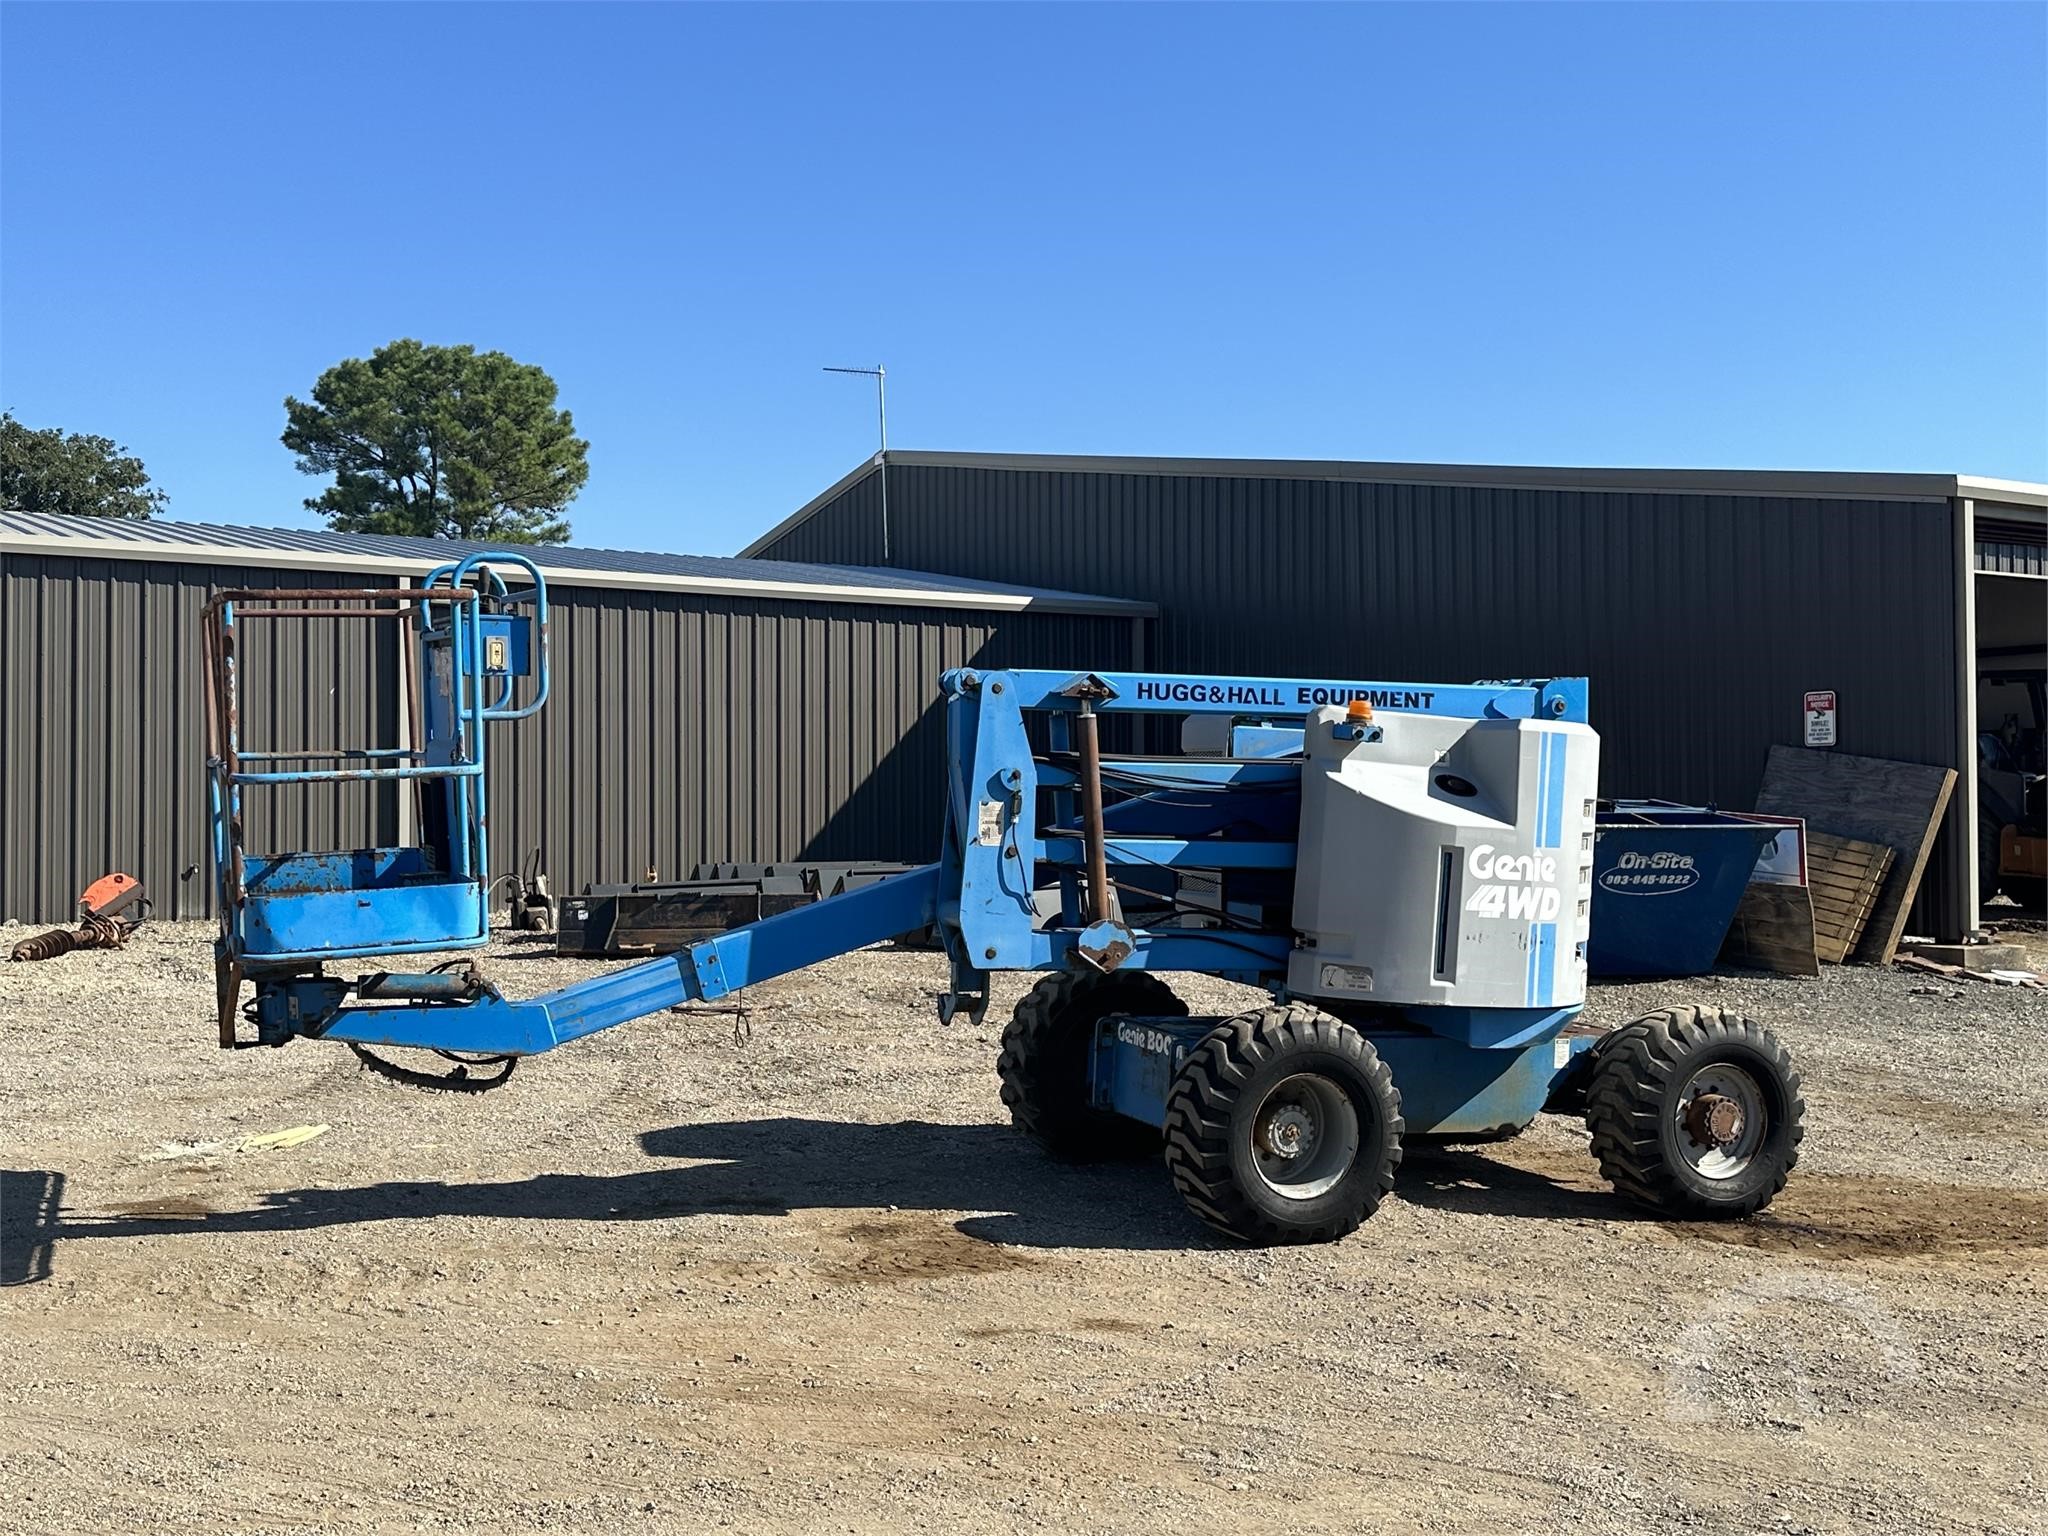 Product Review: Genie Z-45/25 Articulating Boom Lift 